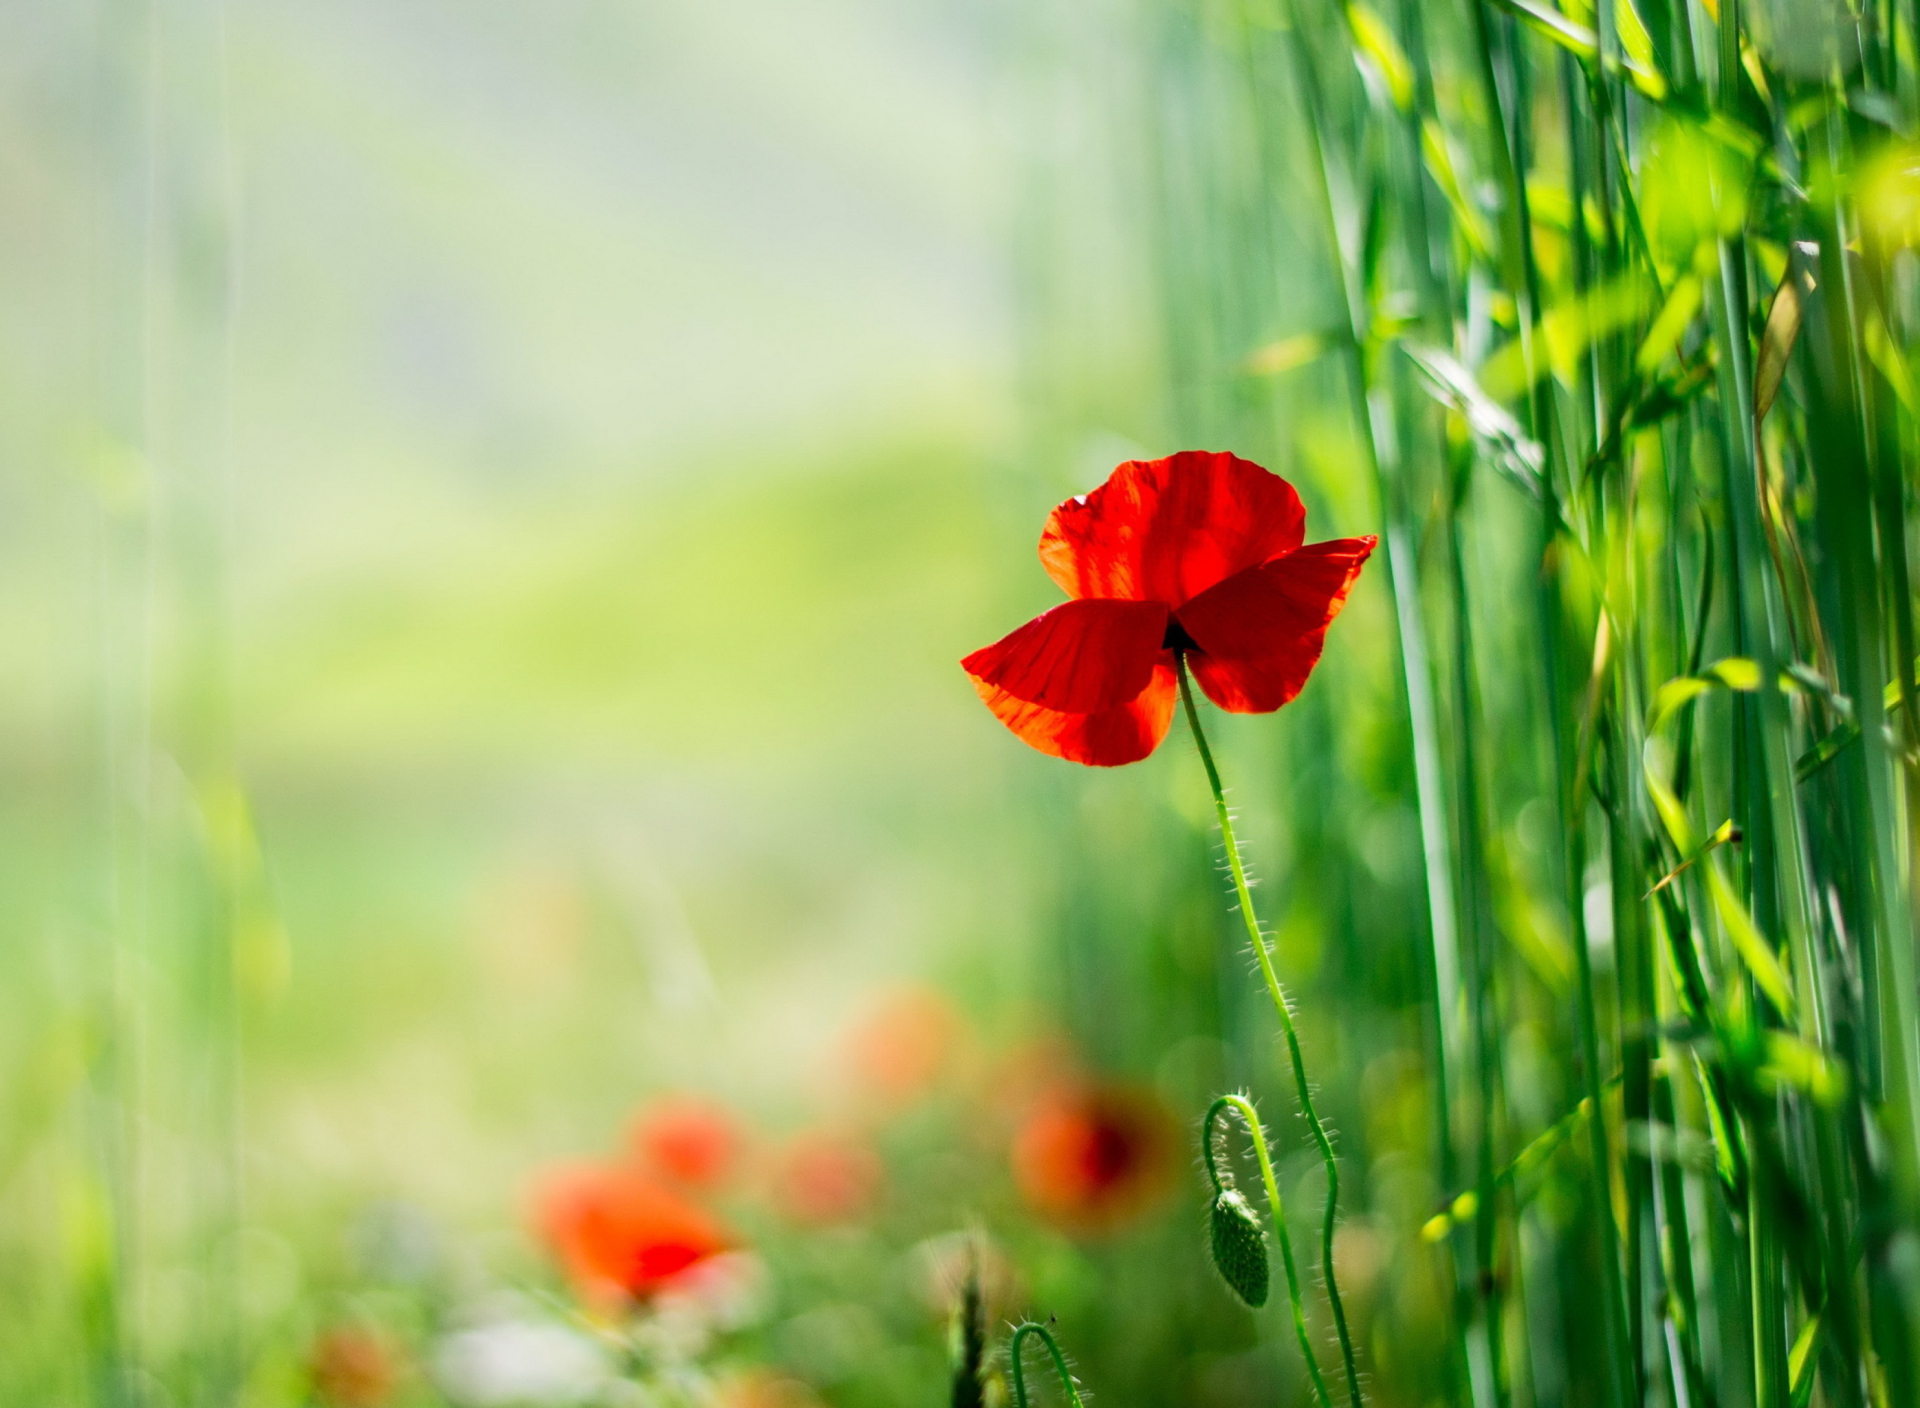 Red Poppy And Green Grass wallpaper 1920x1408